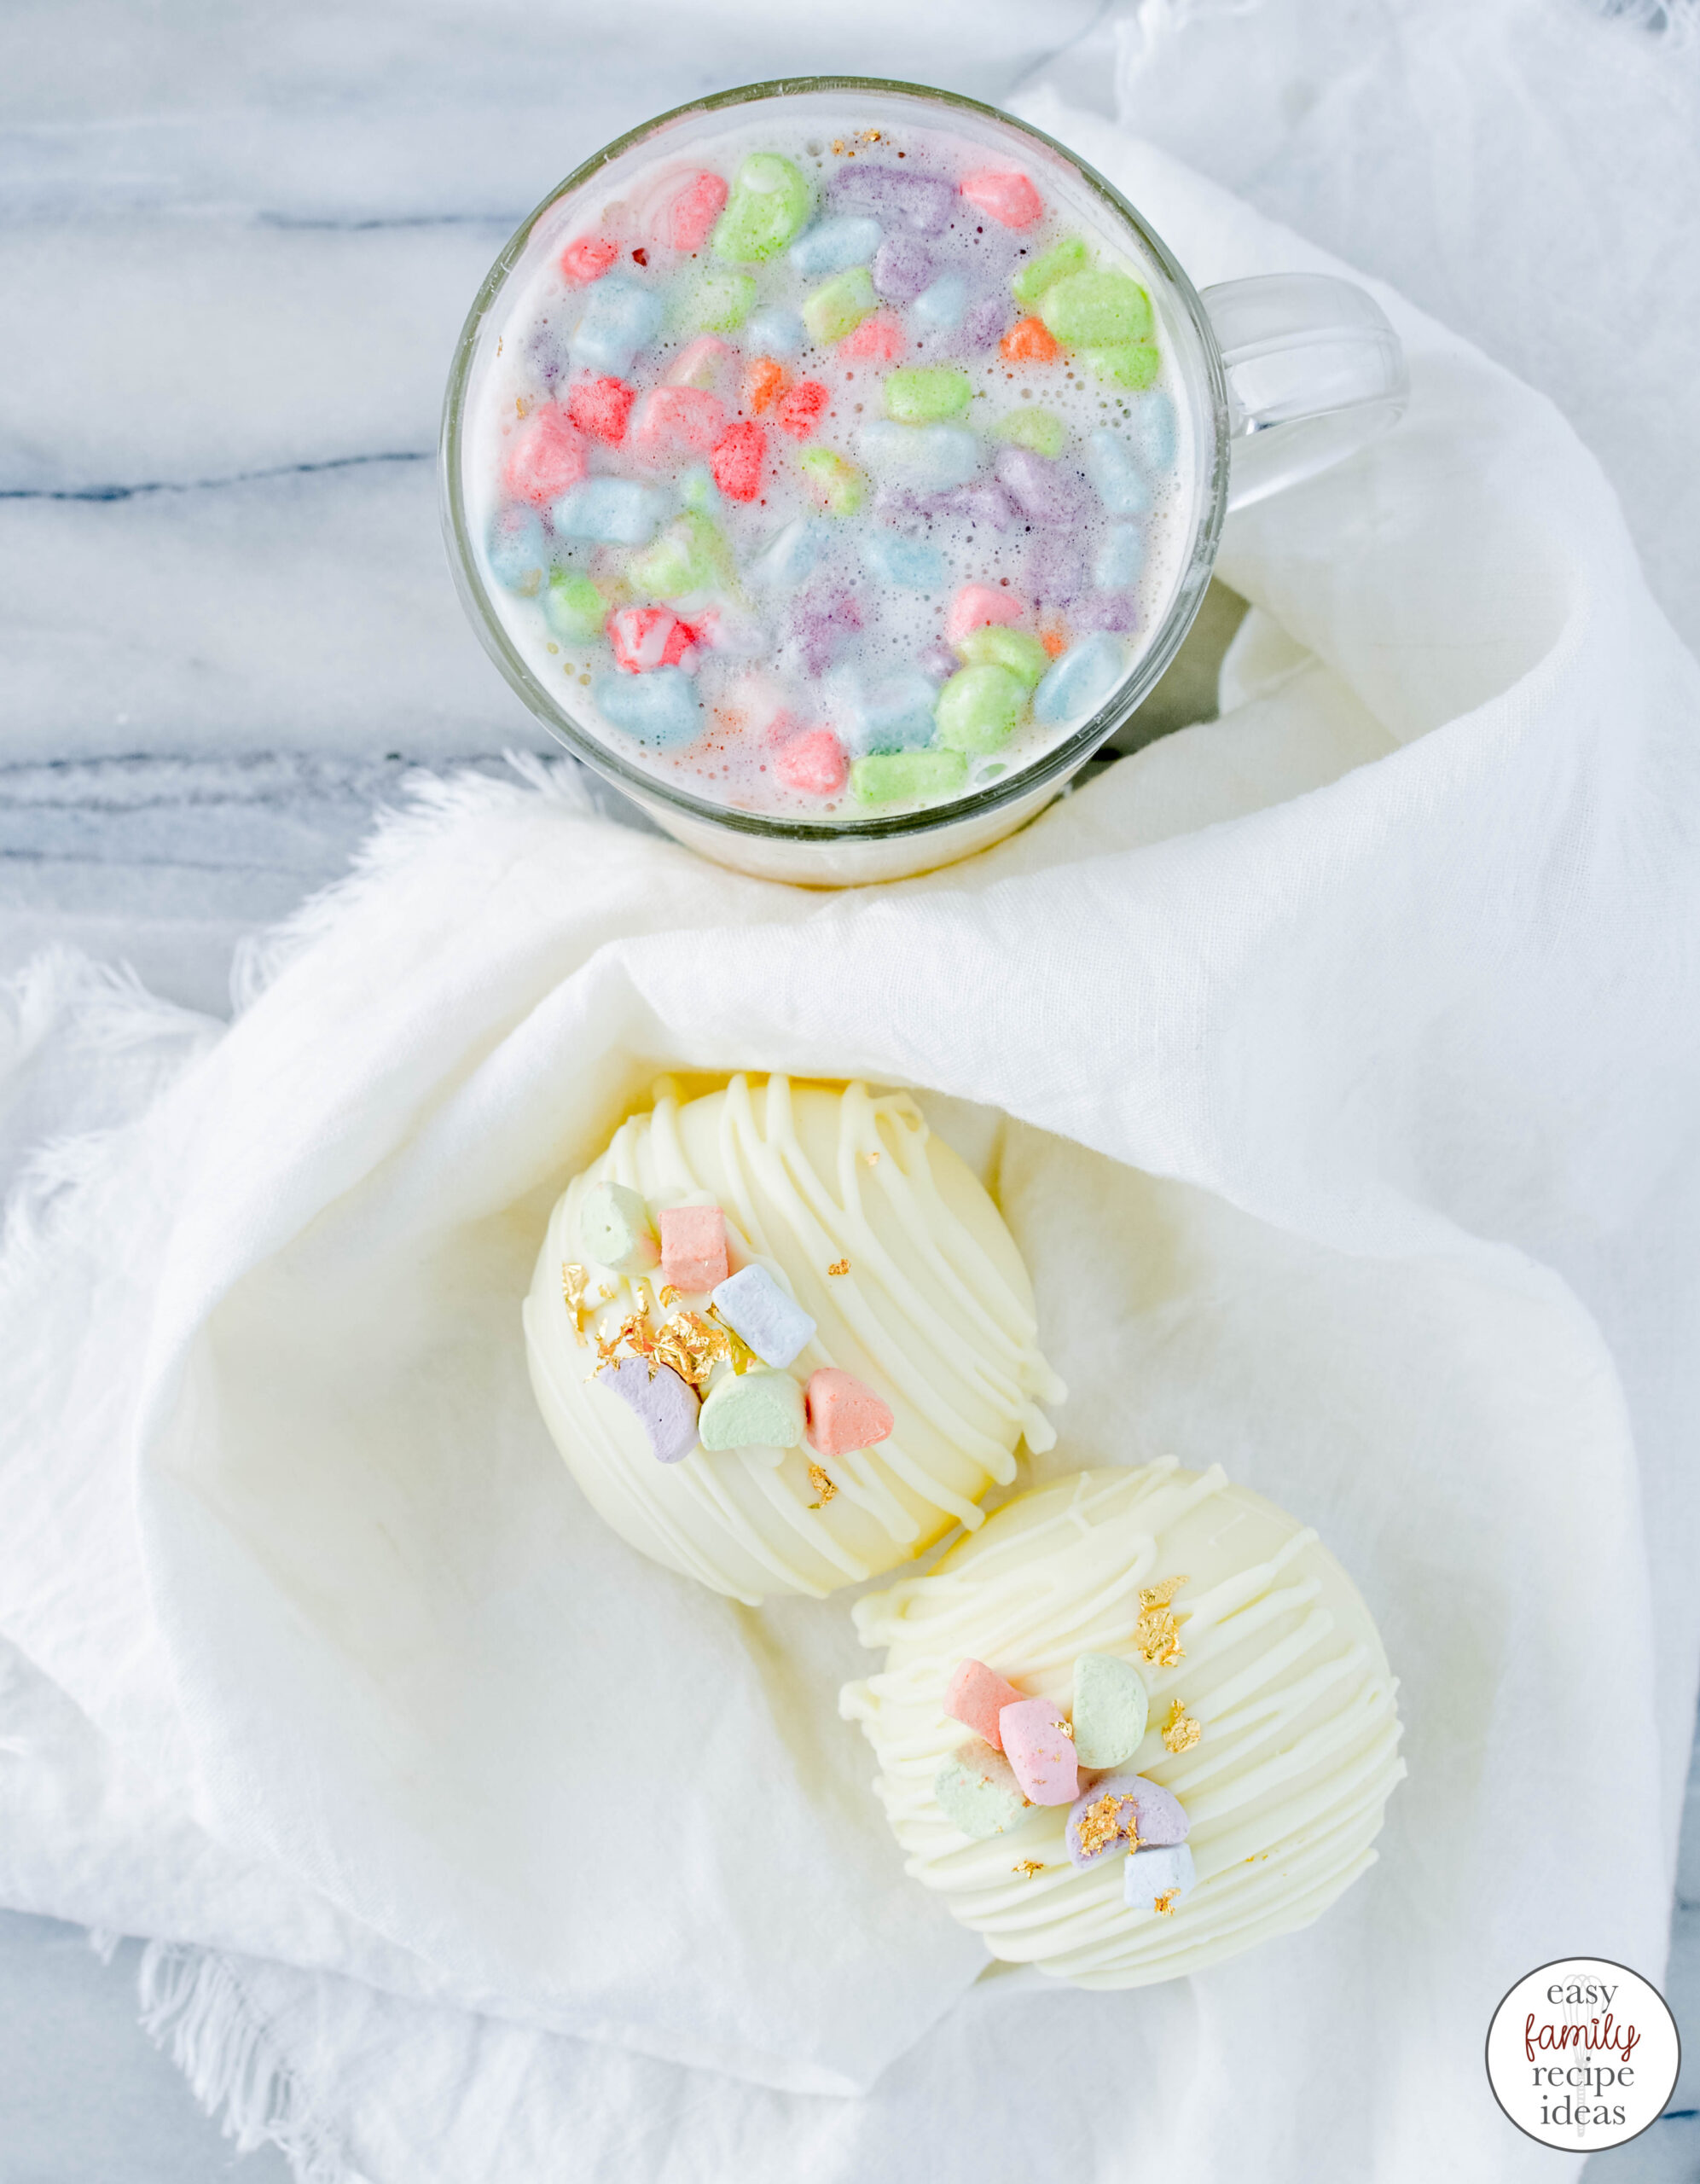 These Hot Cocoa Bombs with Lucky Charms are so good! Learn How to Make Pot of Gold White Chocolate Bomb for St. Patrick's Day or for a Spring Treat, Serve up White Chocolate Hot Chocolate Bombs and St. Patrick's Day Hot Chocolate Bombs to your friends and family 